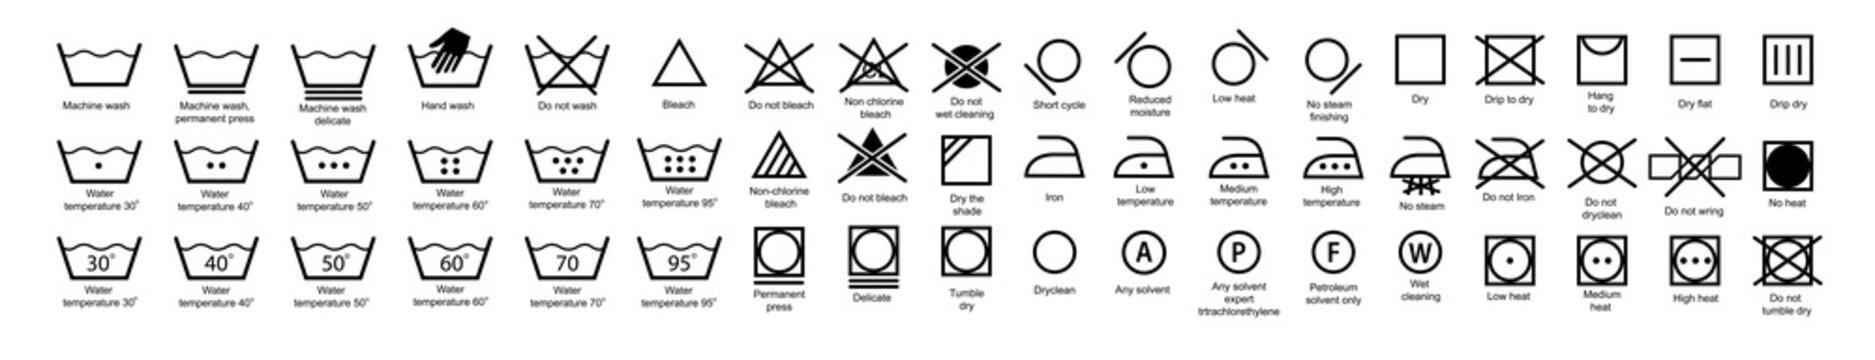 Laundry icons. Garment care instructions on labels, machine wash or hand wash signs. Collection of symbols of water temperature, ironing and drying, types of textiles and fabrics.Vector